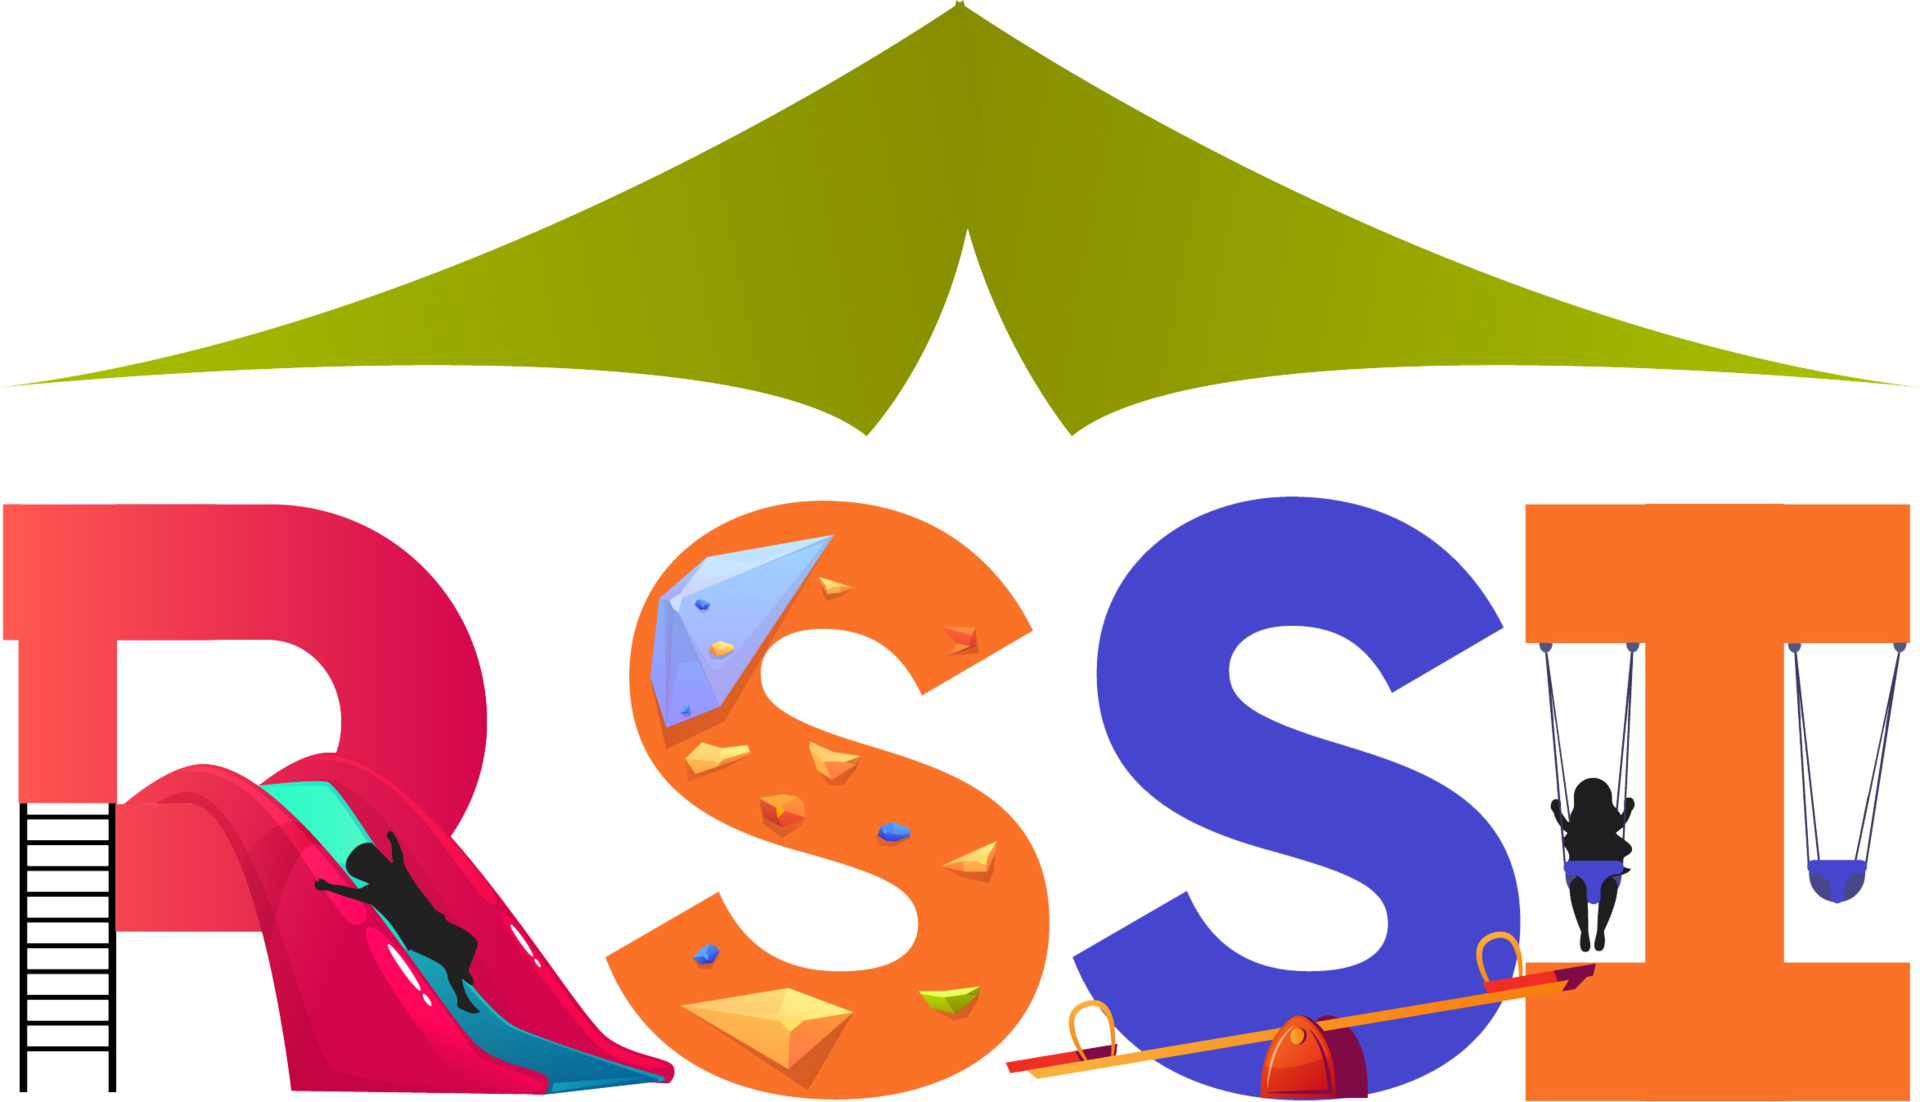 rssi 68